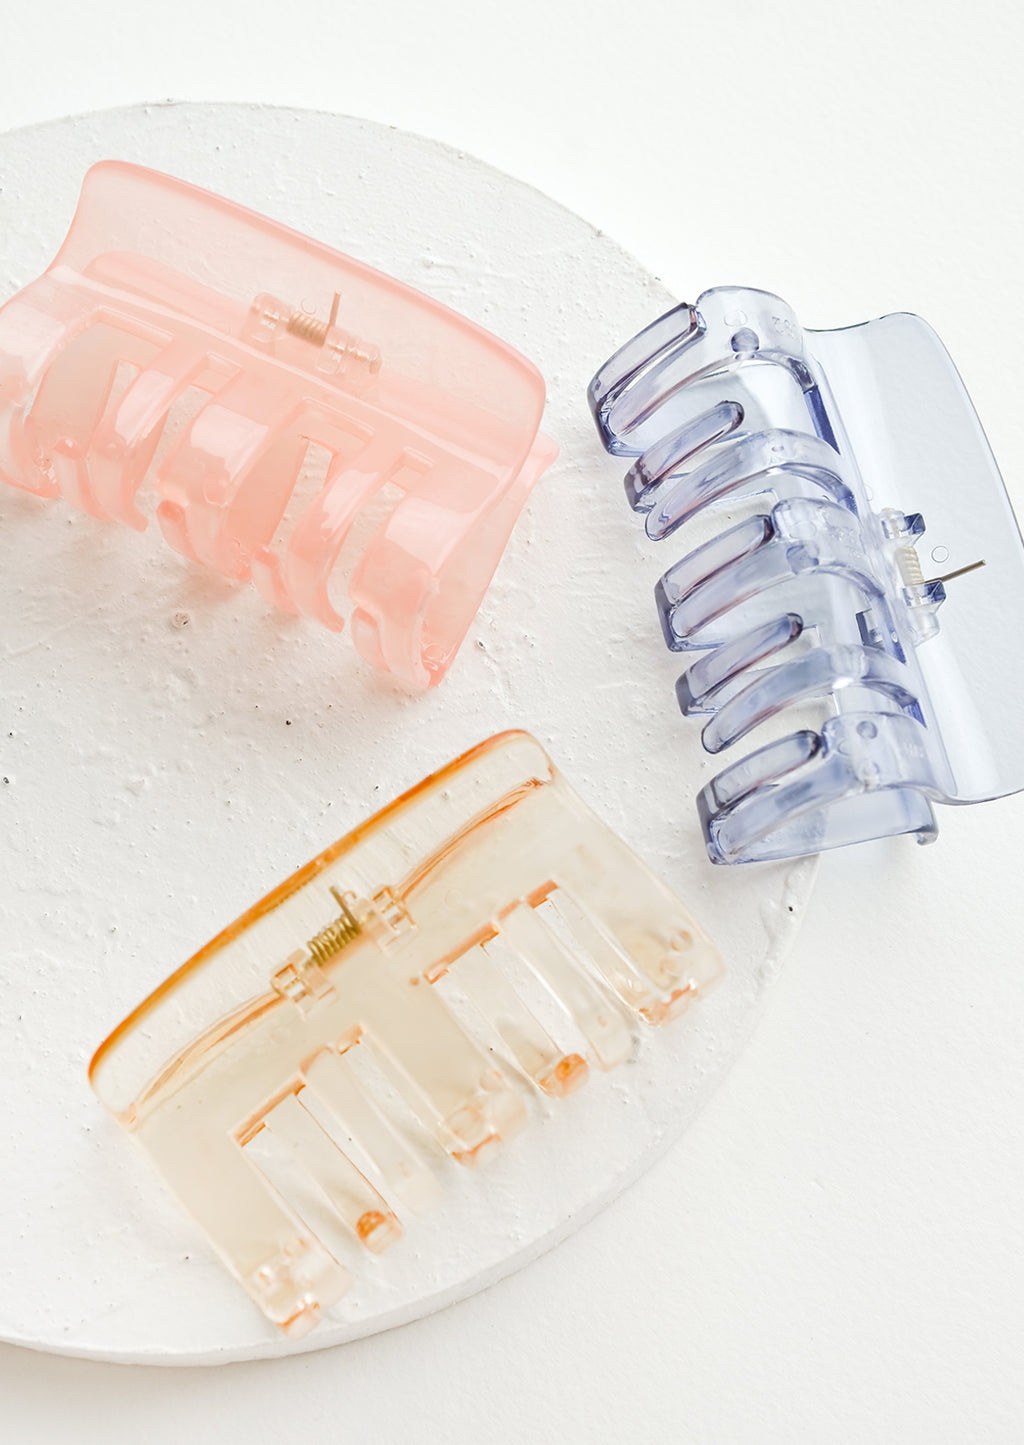 1: Three transparent hair claws in an assortment of colors.